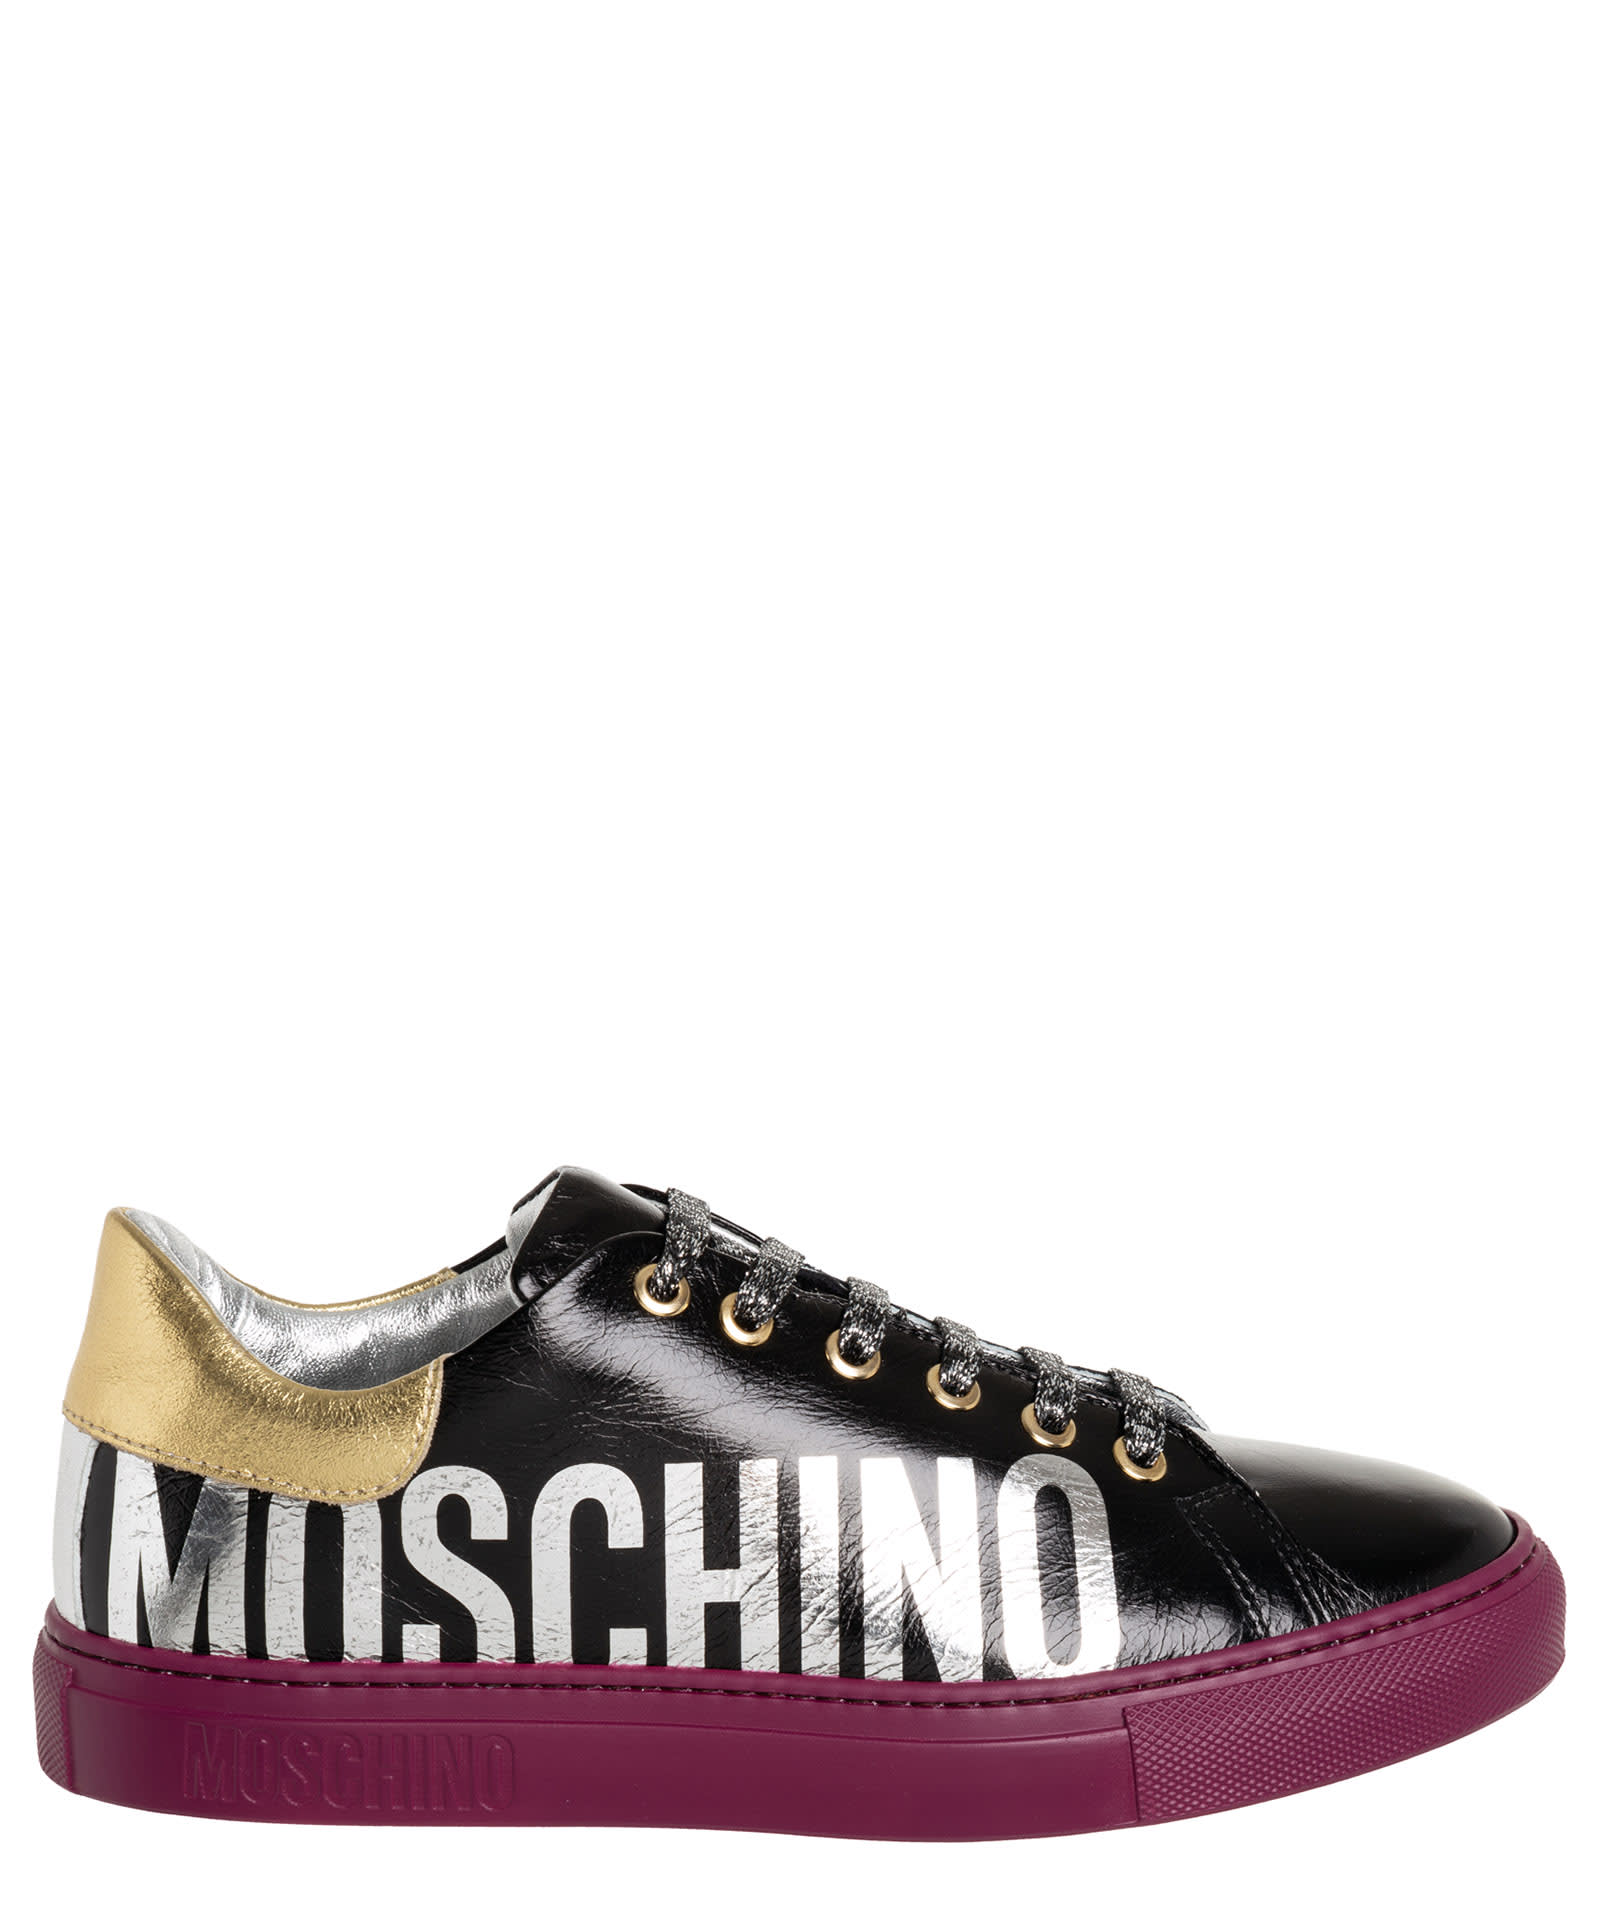 Moschino Serena Leather Sneakers